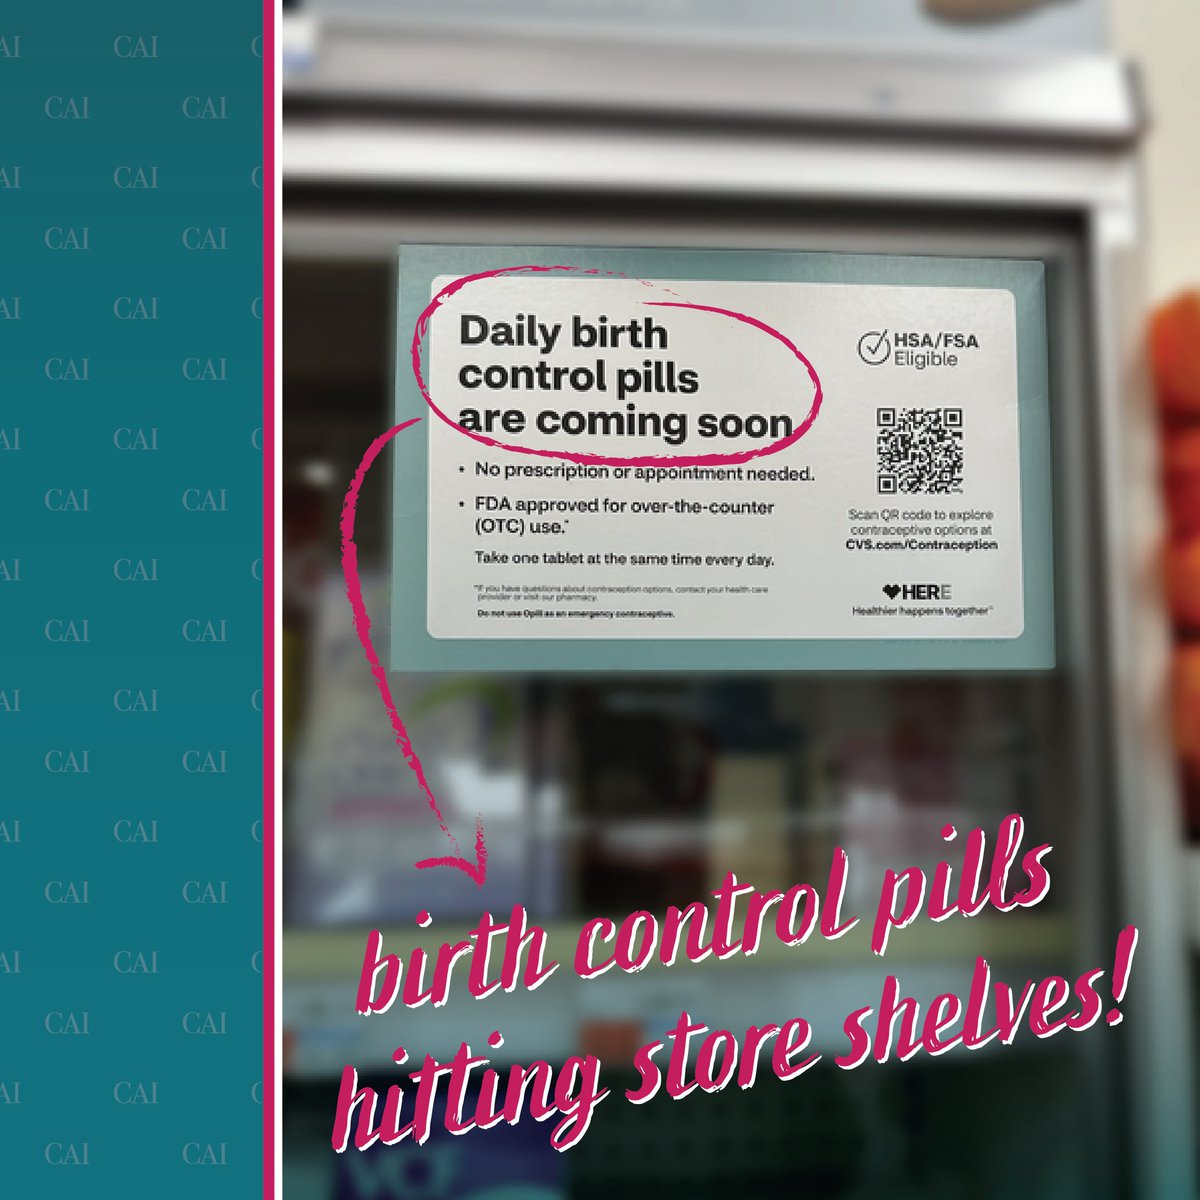 The first OTC birth control pill is hitting store shelves nationwide! 🎉 Have you seen it in your local pharmacy? If so, snap a photo and tag @ThePillOTC #ContraceptiveAccess #ThePillOTC #Opill